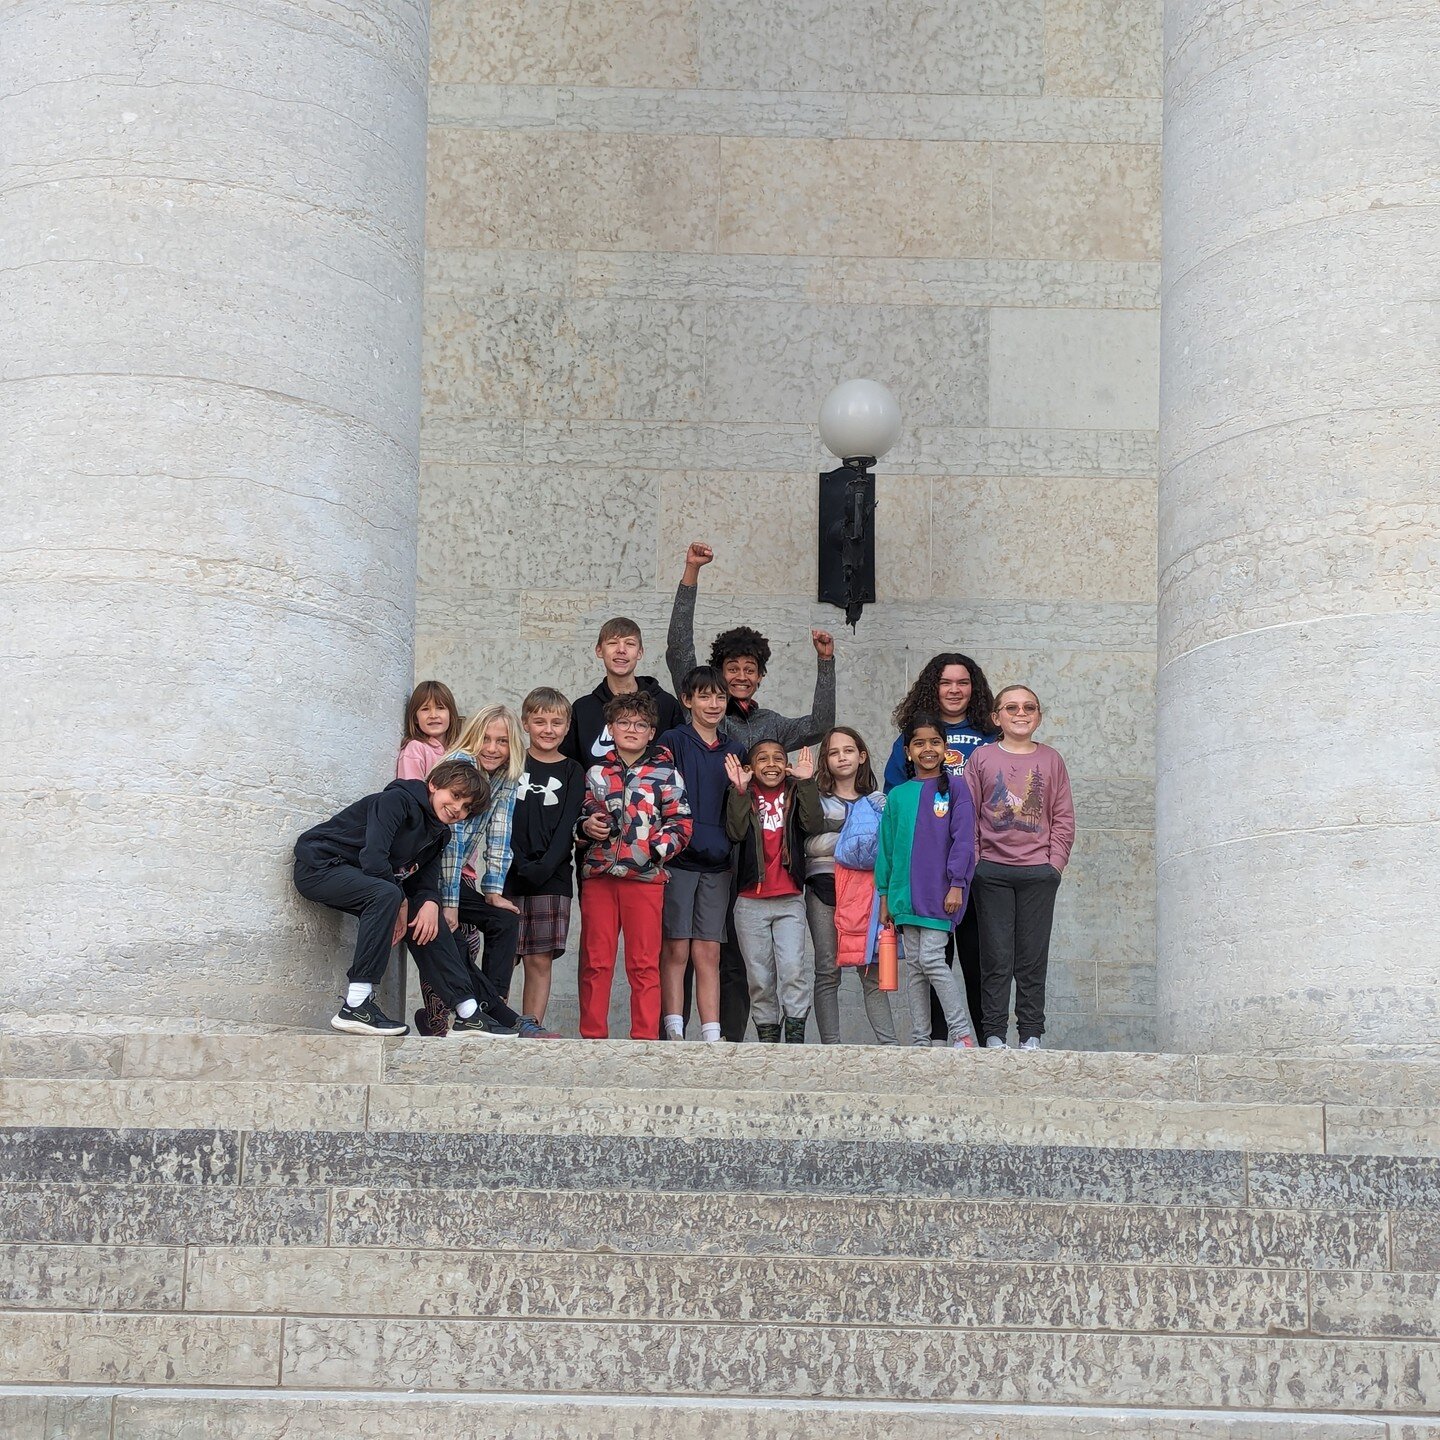 🎉✨What a fun day - Our Middle School / Elementary Studio field trip was a blast! 

First stop: Ohio Statehouse, where we learned loads and had a blast! 📚💡 

Then, Schiller Park for a picnic and games &ndash; volleyball, basketball, soccer, you nam